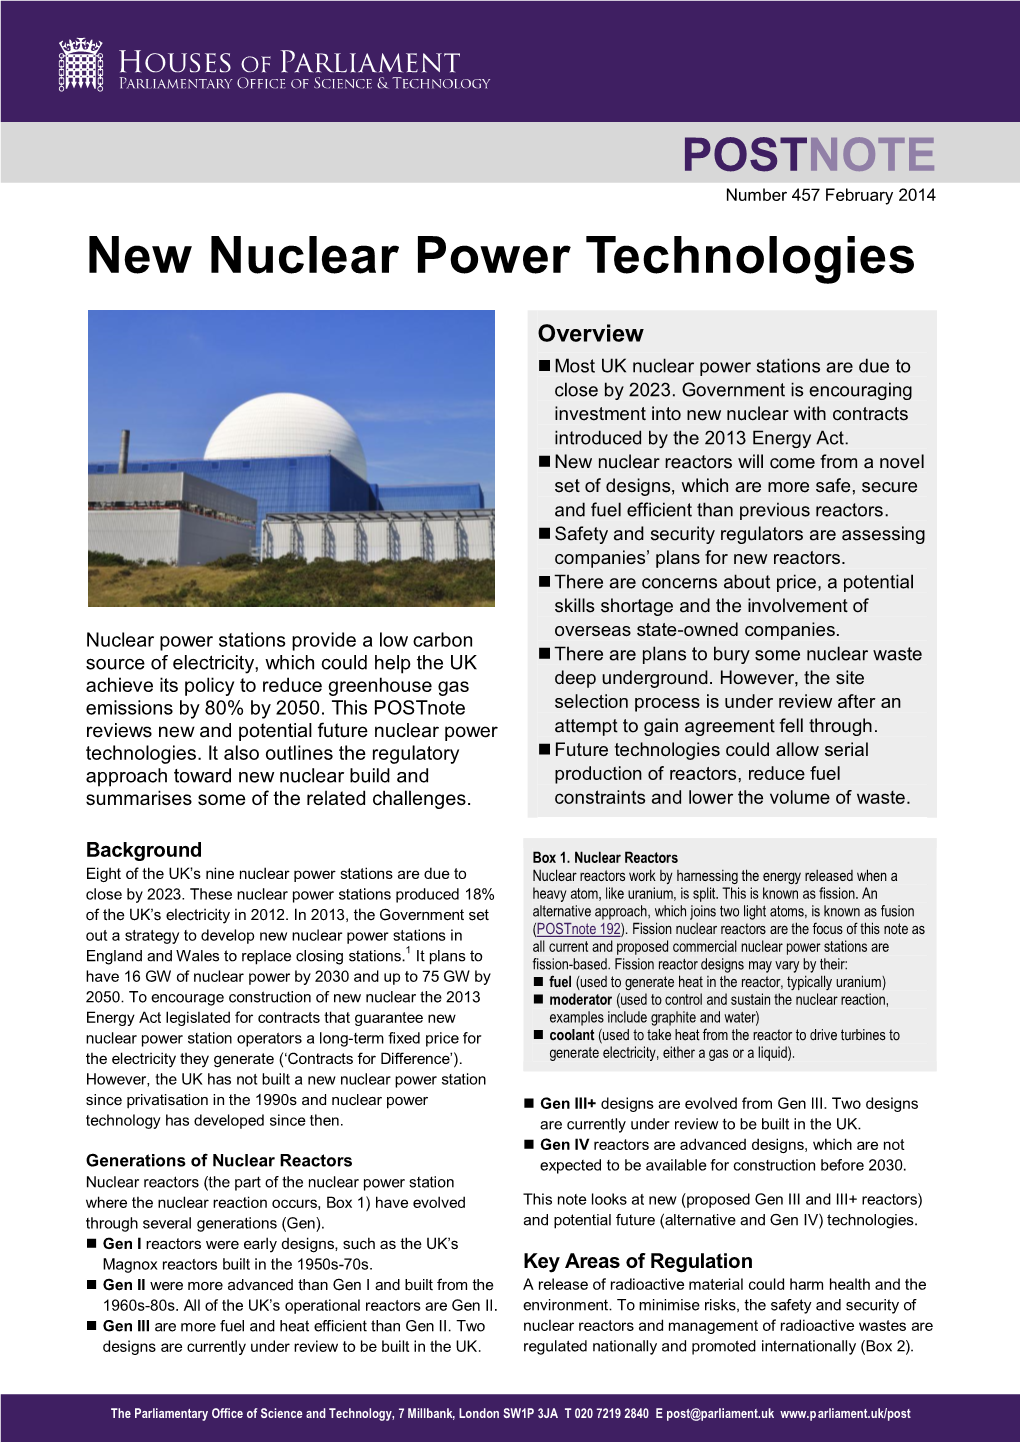 New Nuclear Power Technologies